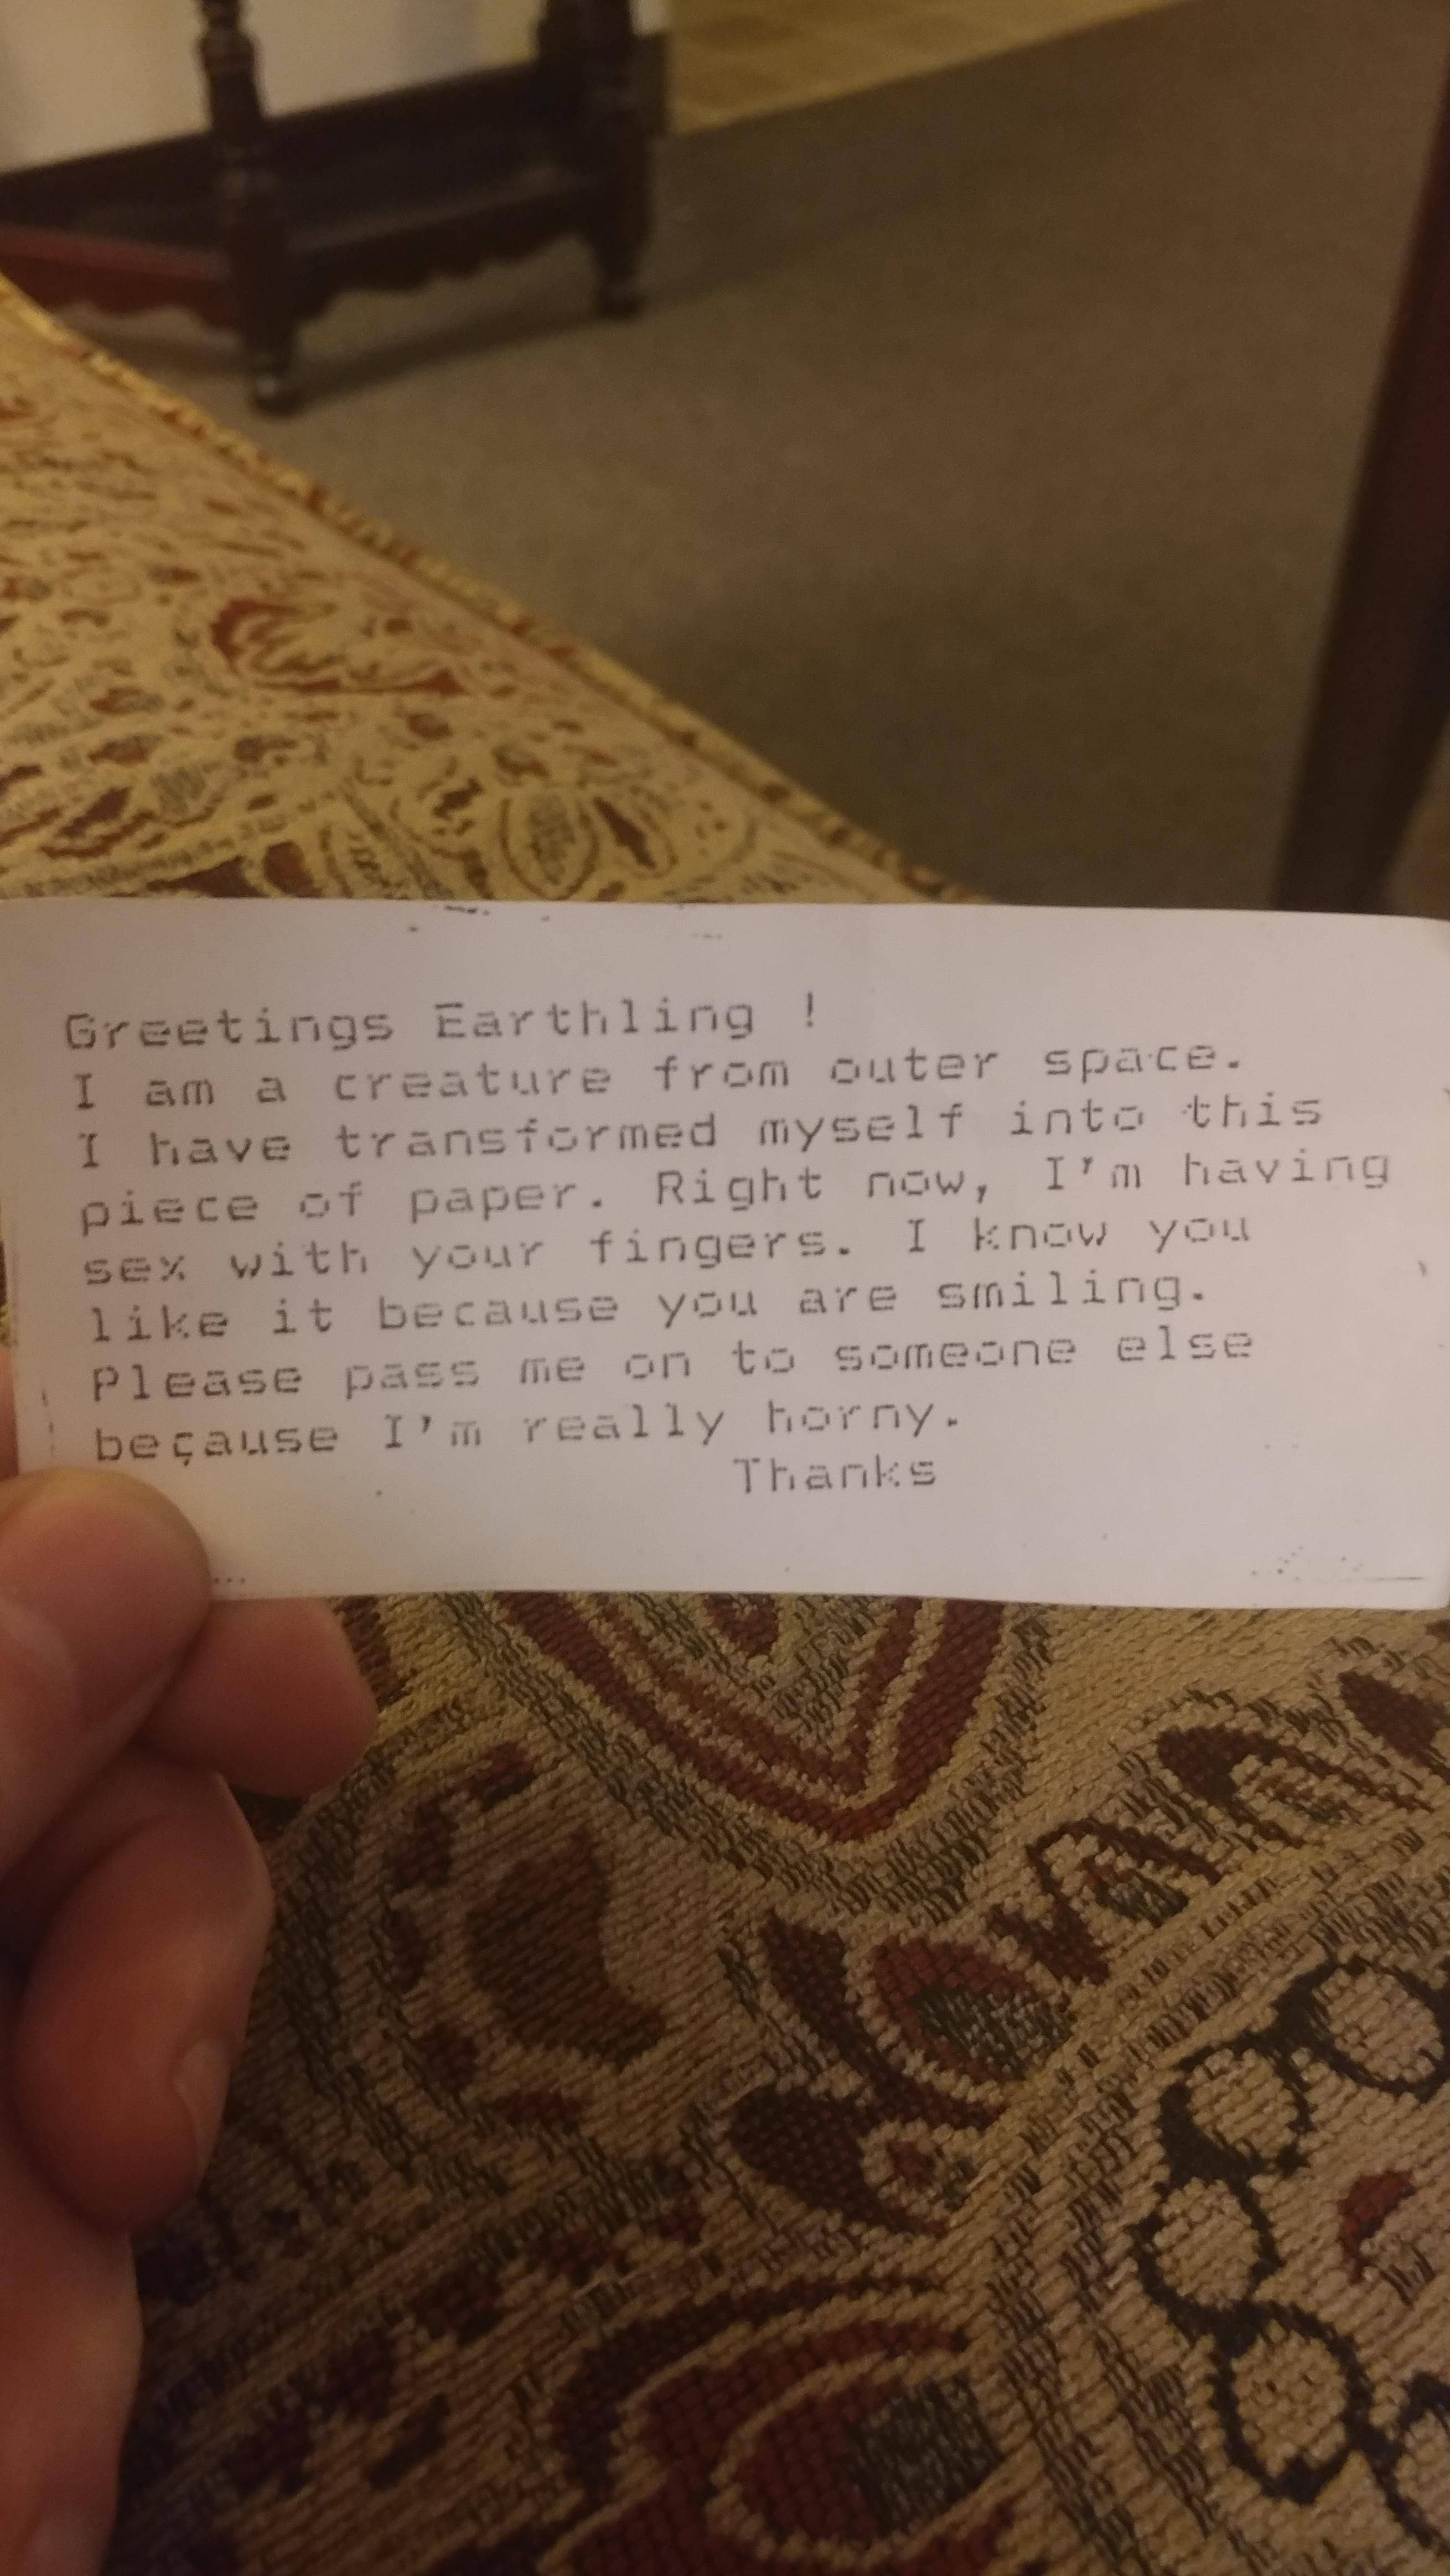 Stranger handed me this today